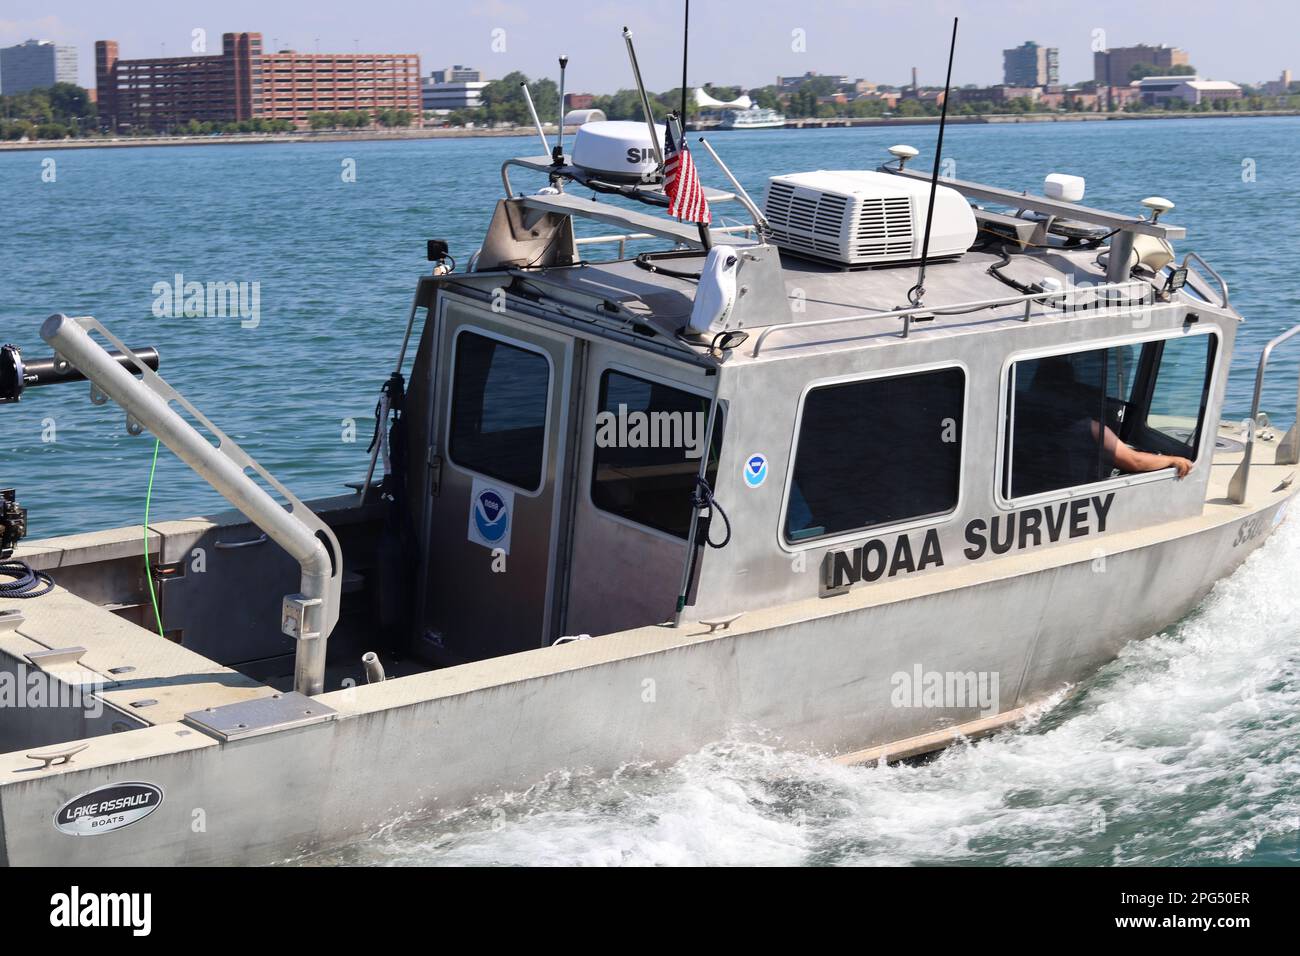 Windsor, Ontario, Canada - August 6 2022: A NOAA Survey vessel working in the Detroit River on the Windsor side Stock Photo